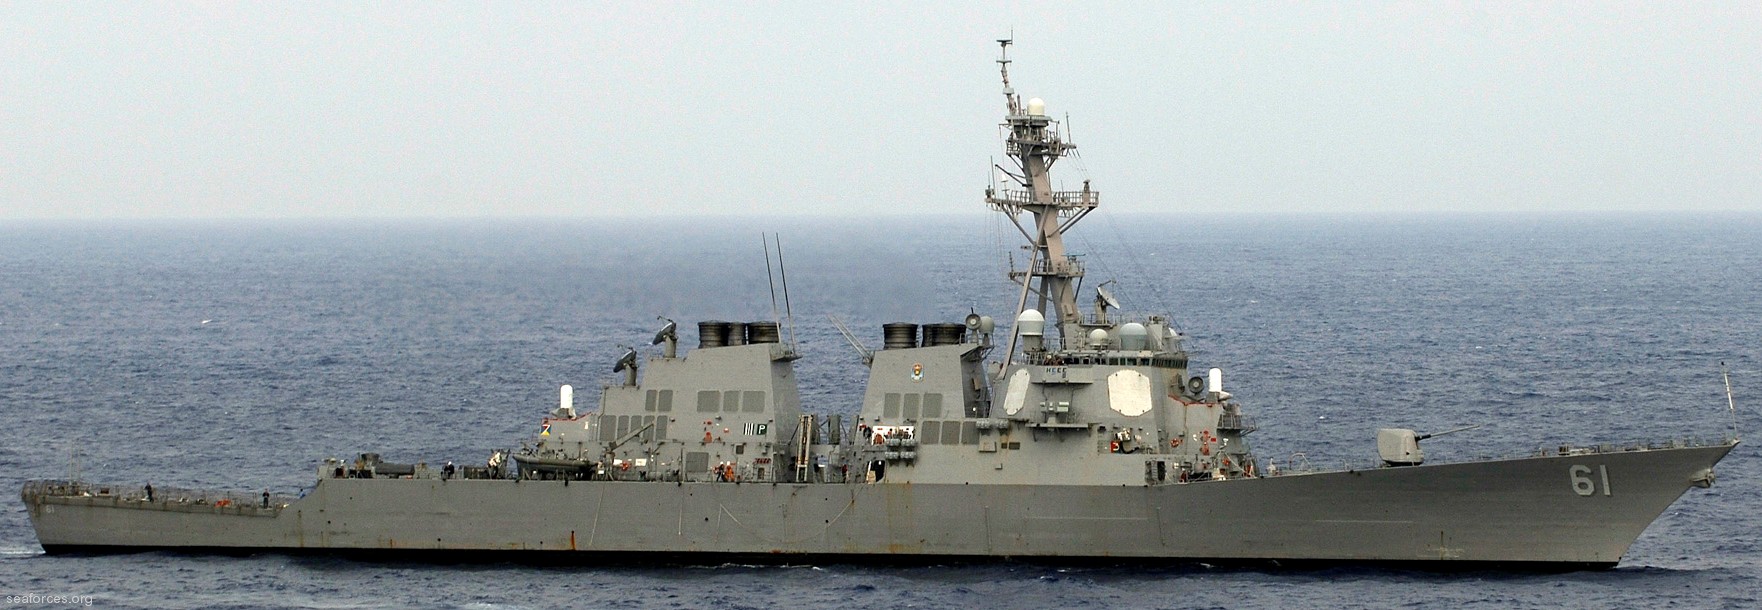 ddg-61 uss ramage guided missile destroyer us navy 52